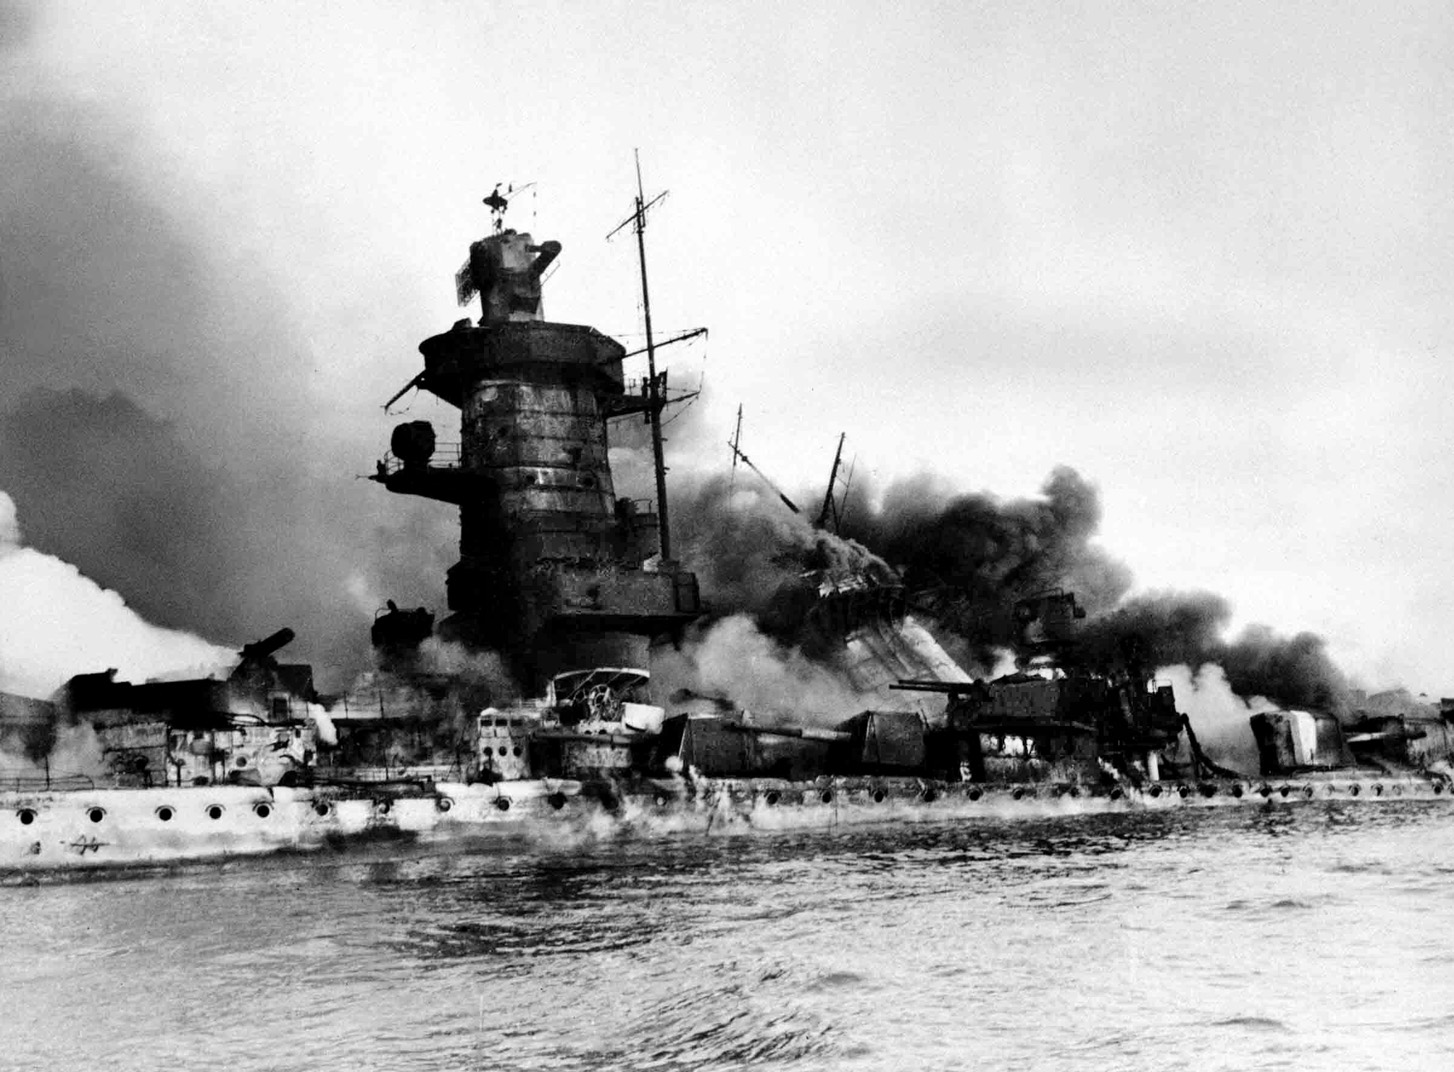 Scuttled by its crew, the pocket battleship Graf Spee lists heavily and settles during its death throes on December 17, 1939, off the mouth of the River Plate and the harbor of Montevideo, Uruguay. After a battle with three British cruisers, Captain Hans Langsdorff was convinced that an overwhelming Allied naval force awaited his return to sea from Montevideo and ordered his crew to sink their own ship.